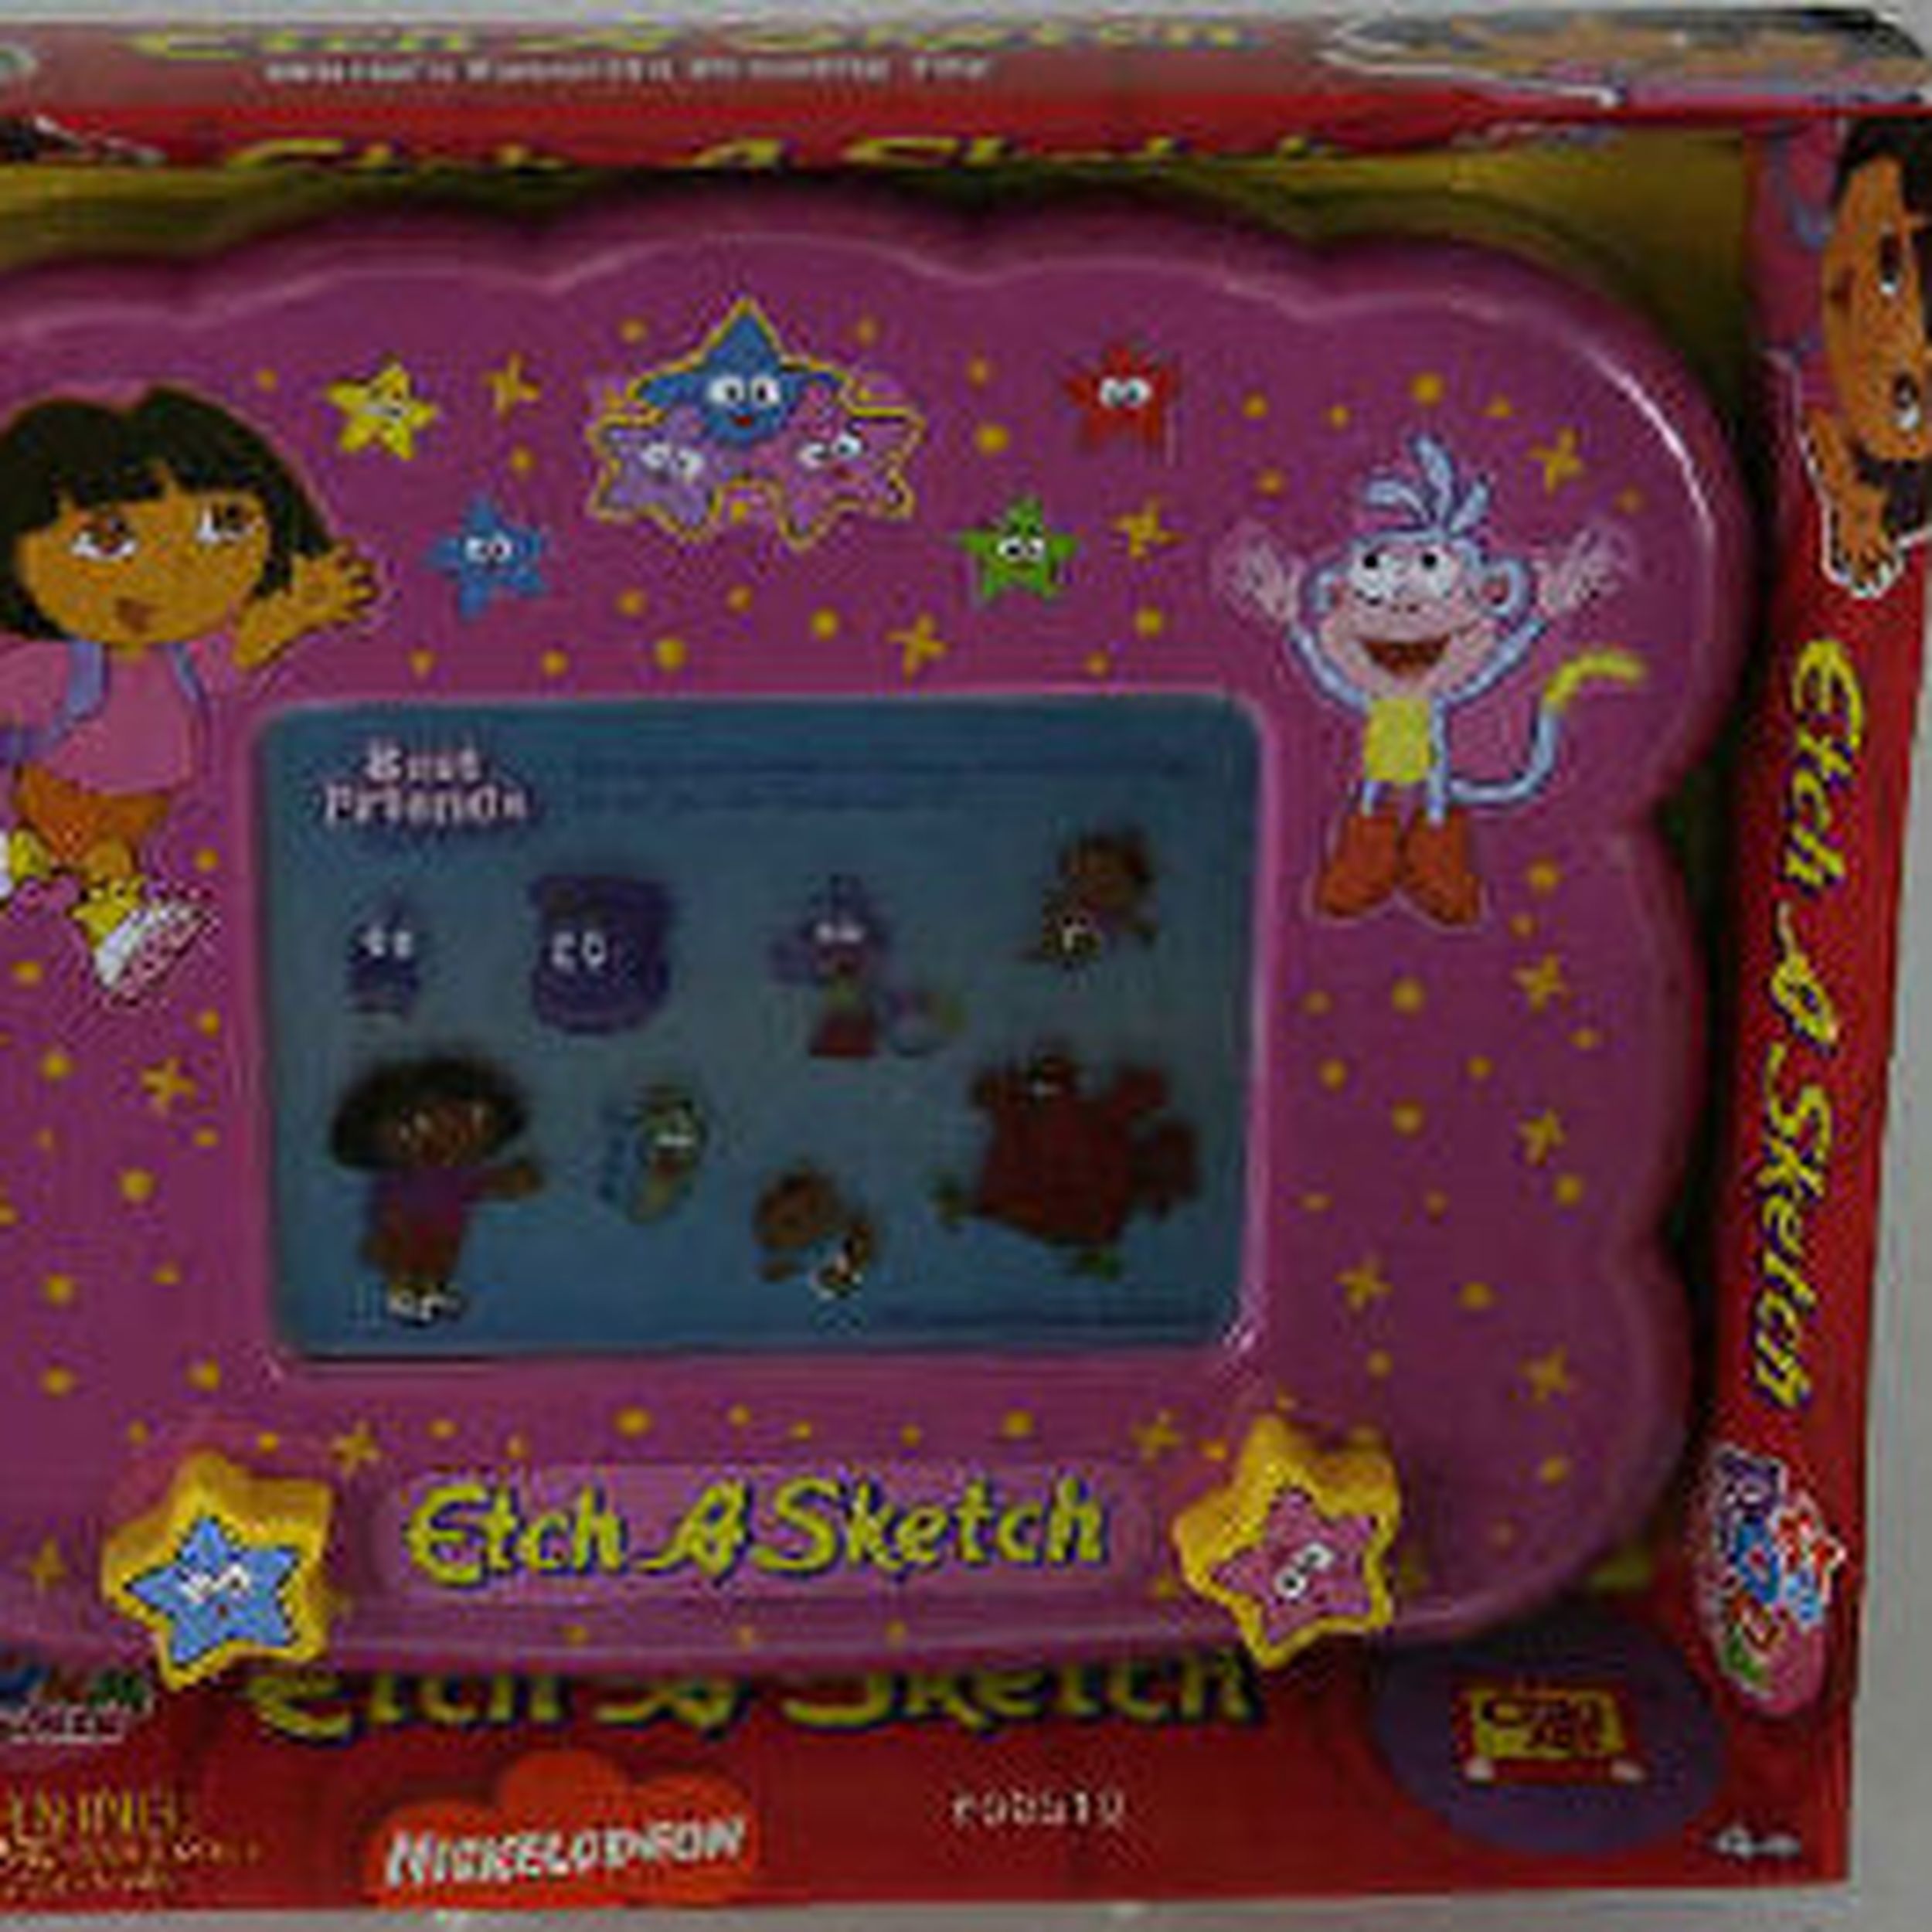 Etch a Sketch Says  Kids Logo is a Ripoff of Classic Toy